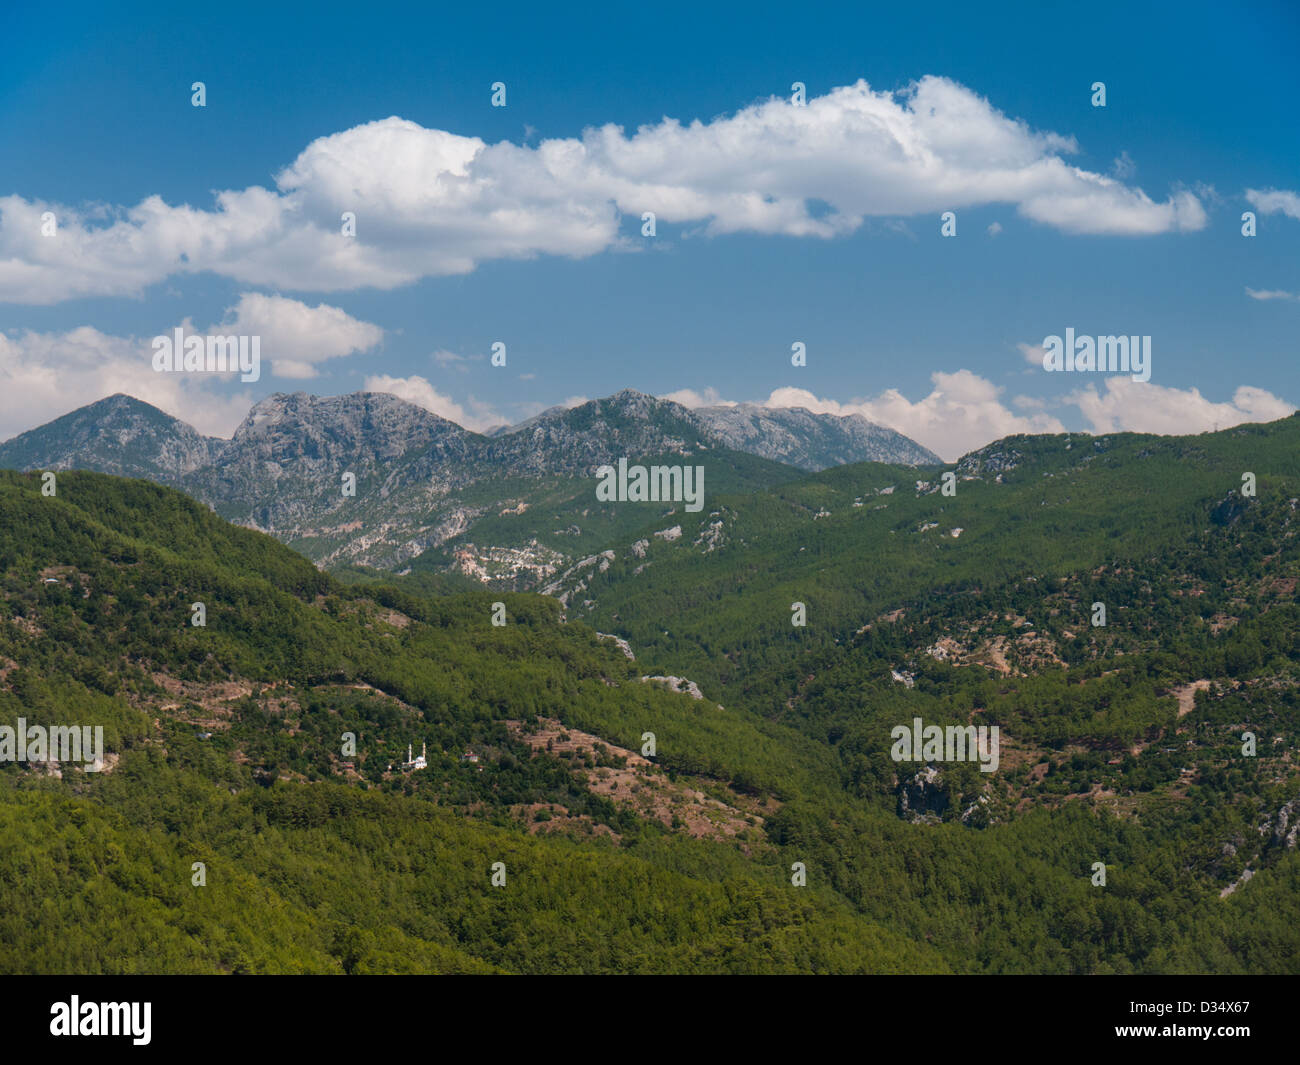 View of the Taurus mountains, Turkey, with remote mosque in the foreground. Stock Photo